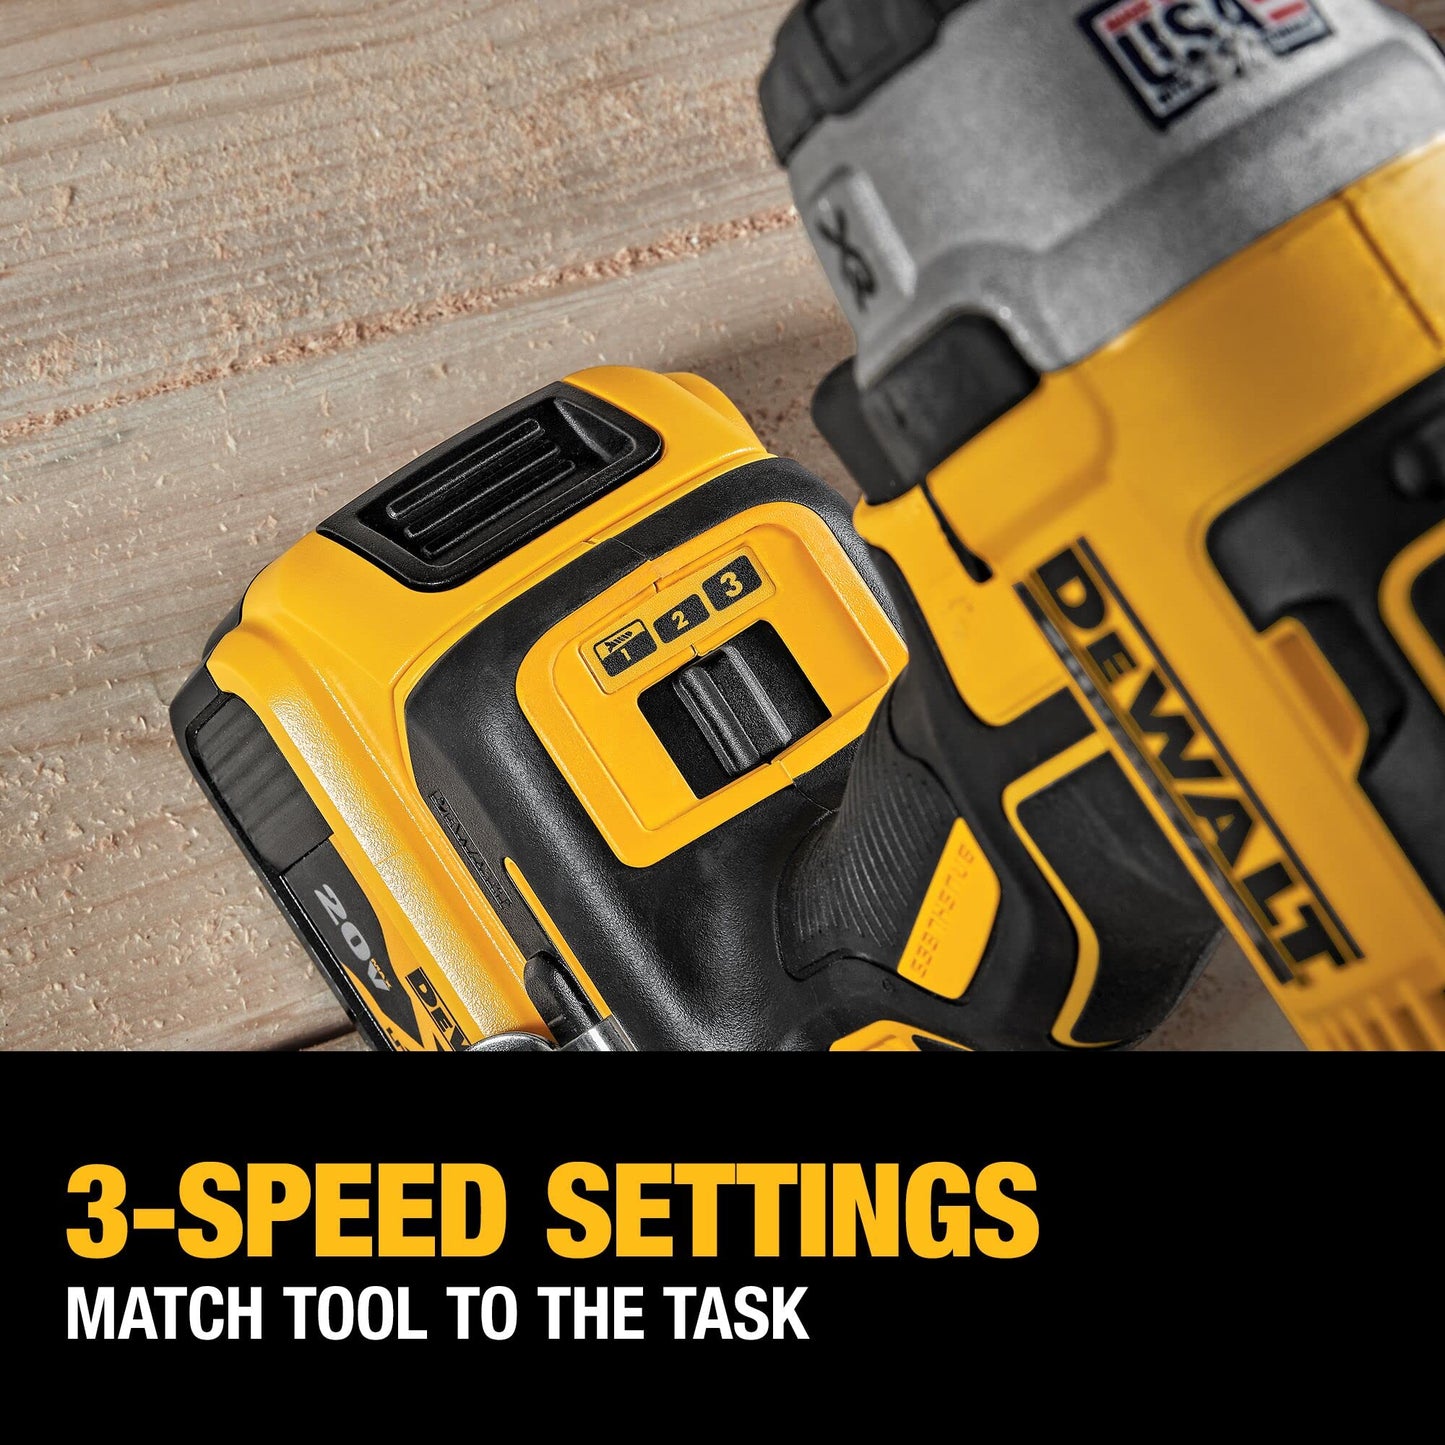 DEWALT 20V MAX Hammer Drill and Impact Driver, Cordless Power Tool Combo Kit with 2 Batteries and Charger (DCK299P2)